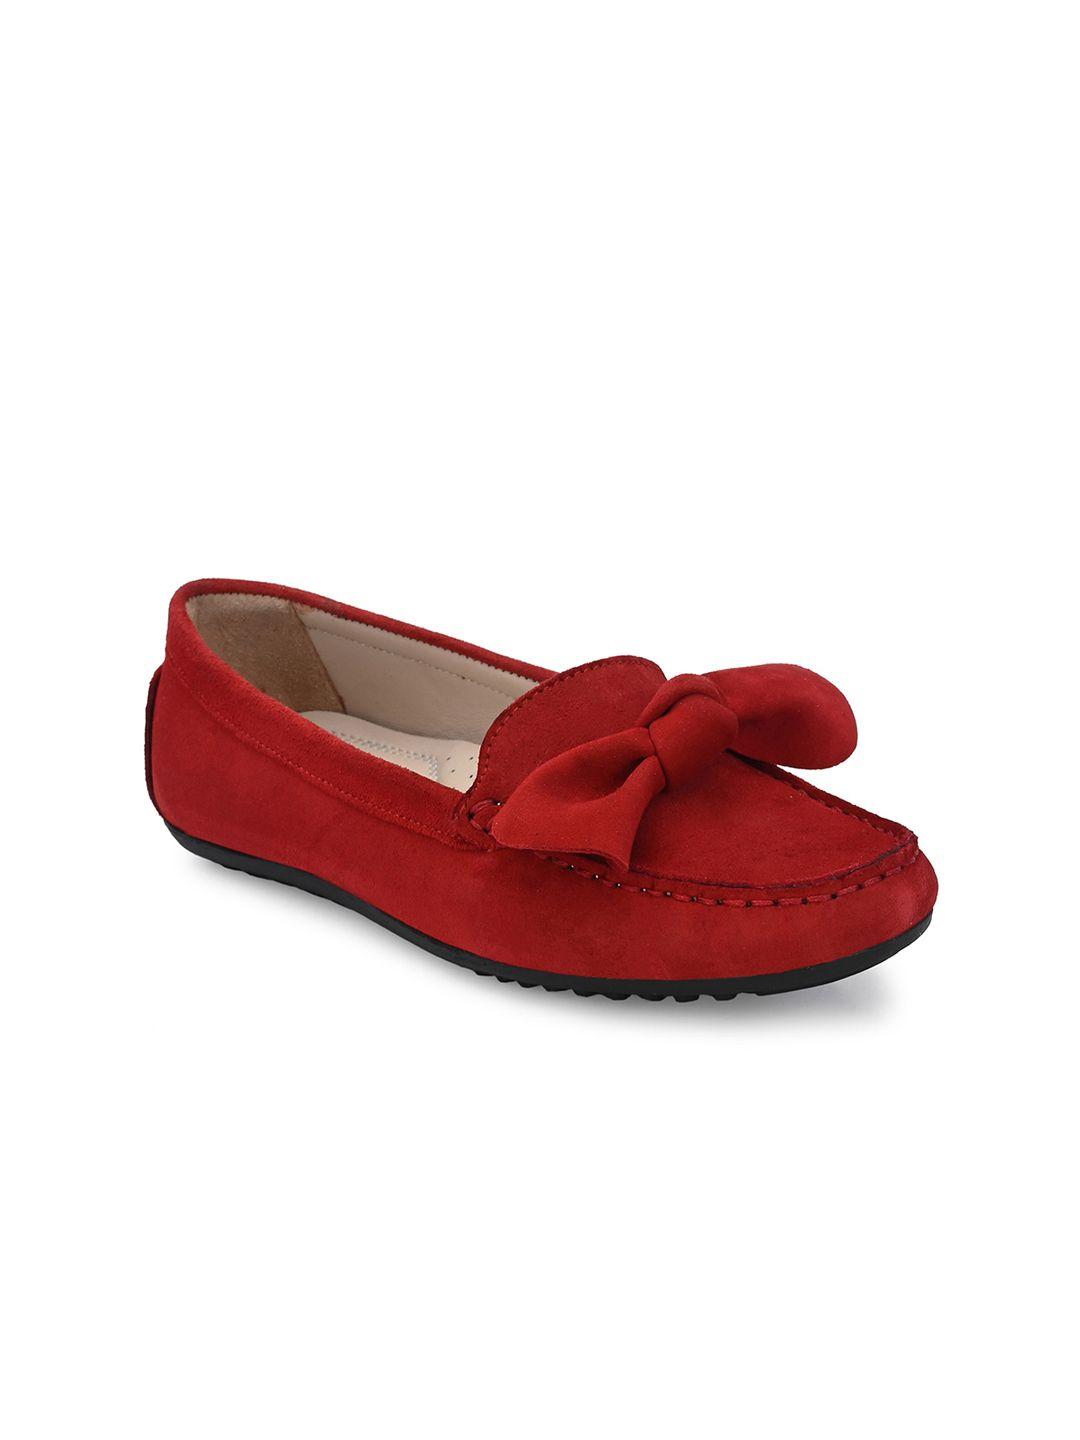 carlo romano women red suede loafers